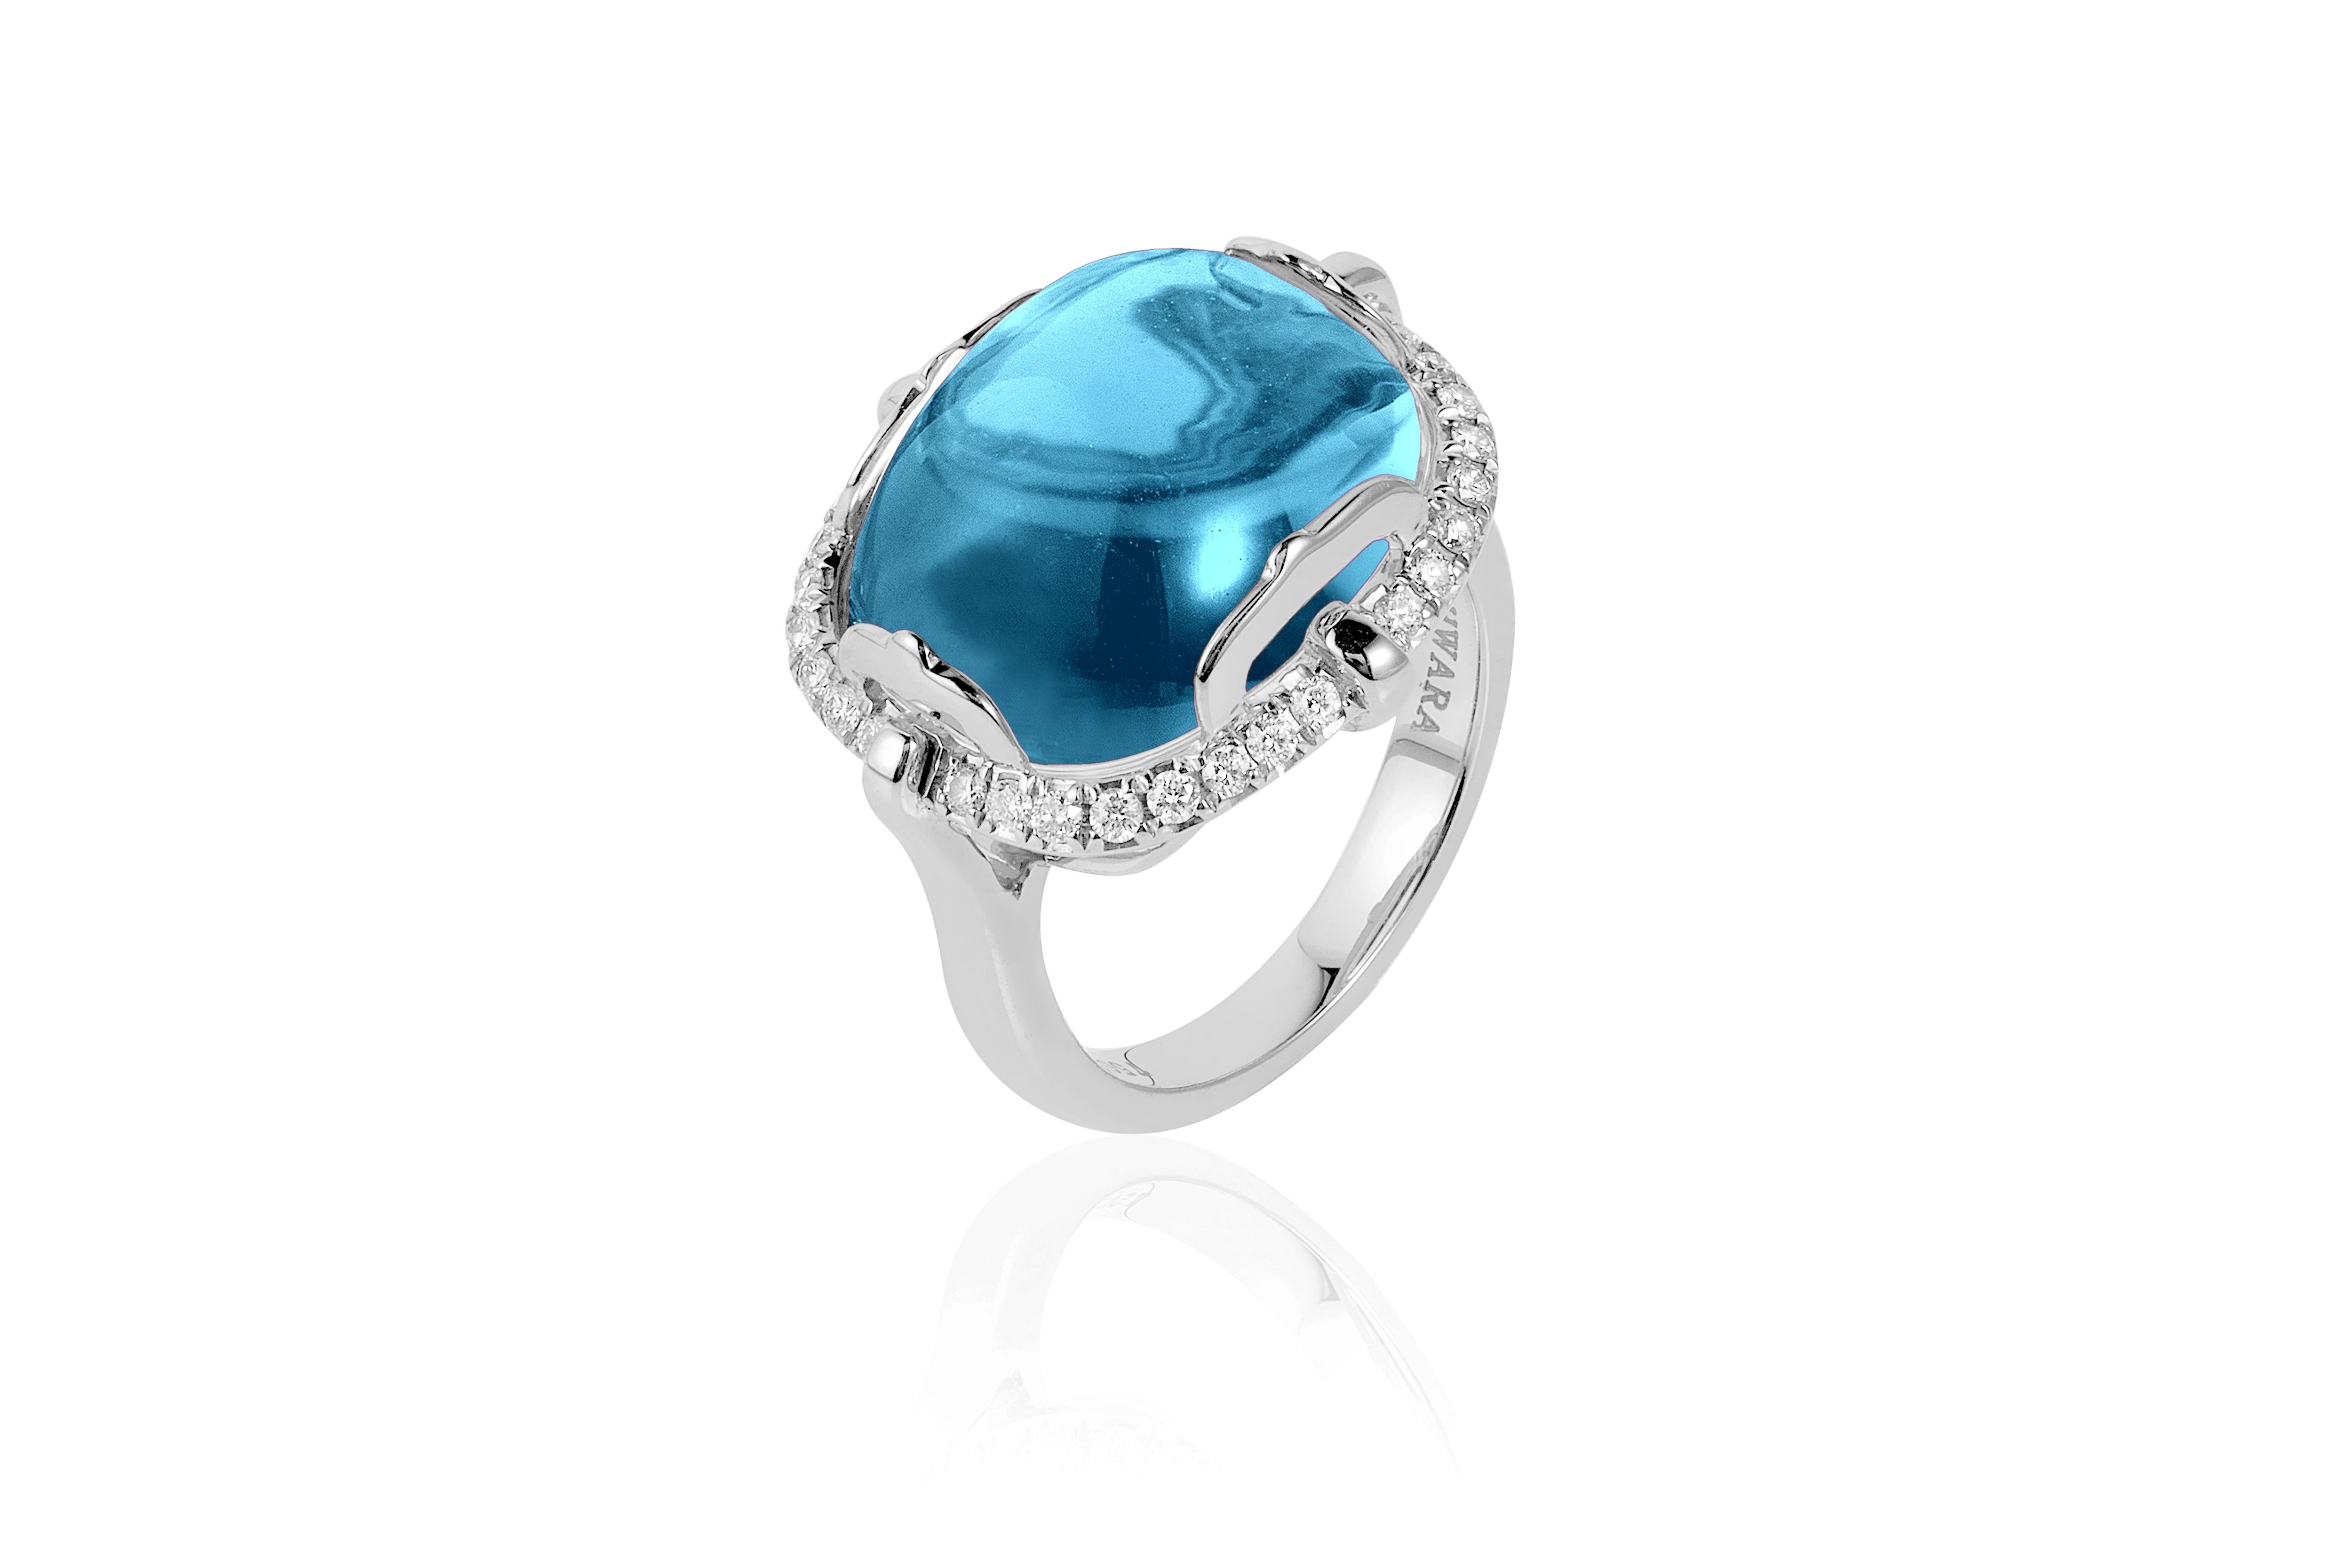 Blue Topaz Cushion Cabochon Ring in 18K White Gold with Diamonds from 'Rock 'N Roll' Collection

Stone Size: 16 x 13 mm 

Gemstone ApproxWt: Blue Topaz- 15.6 Carats

Diamonds: G-H / VS, Approx Wt: 0.34 Carats